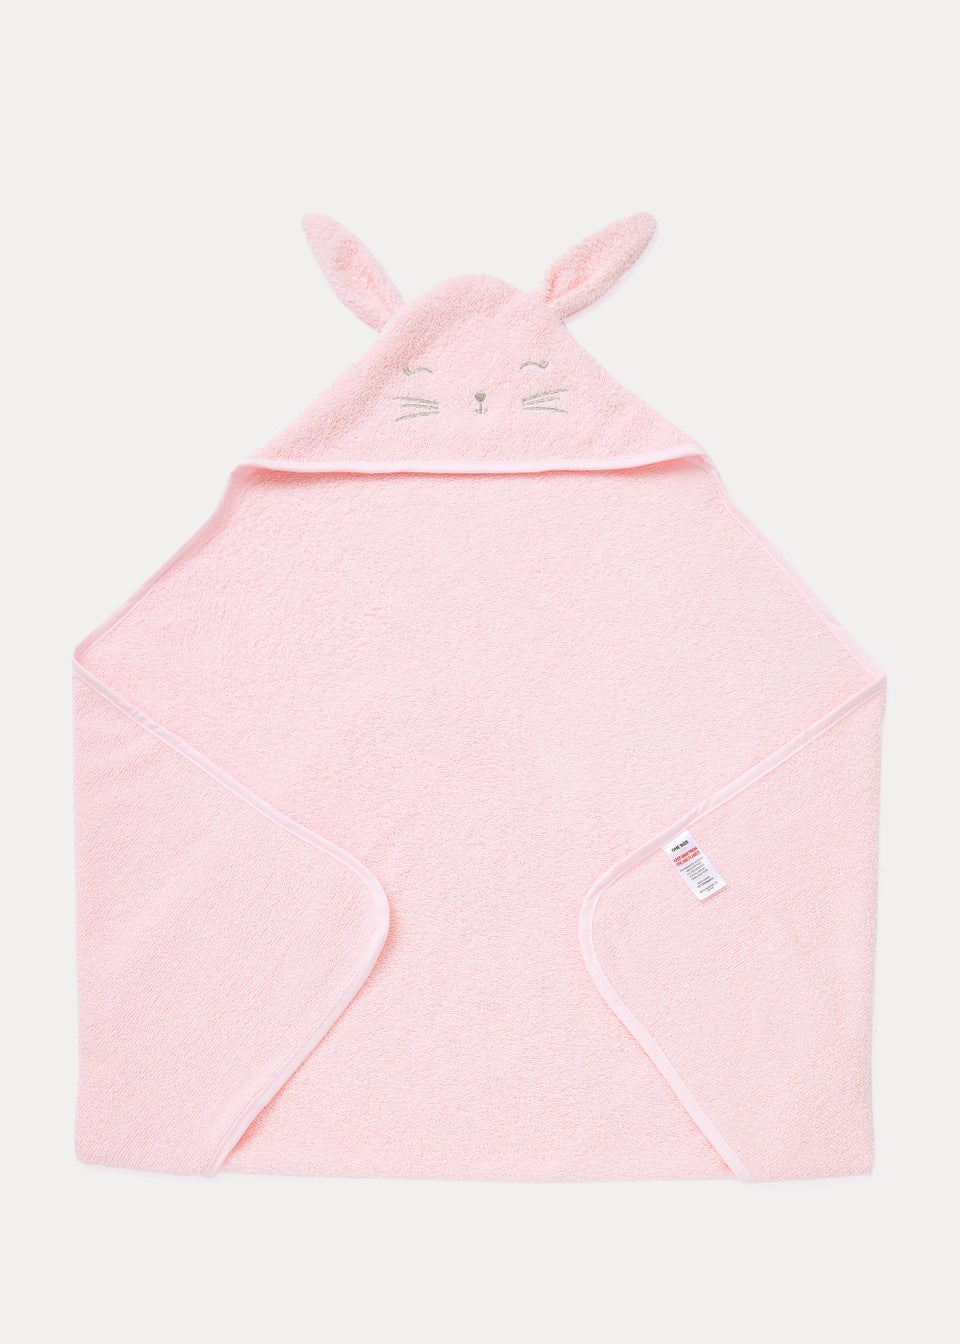 Pink Bunny Hooded Baby Towel